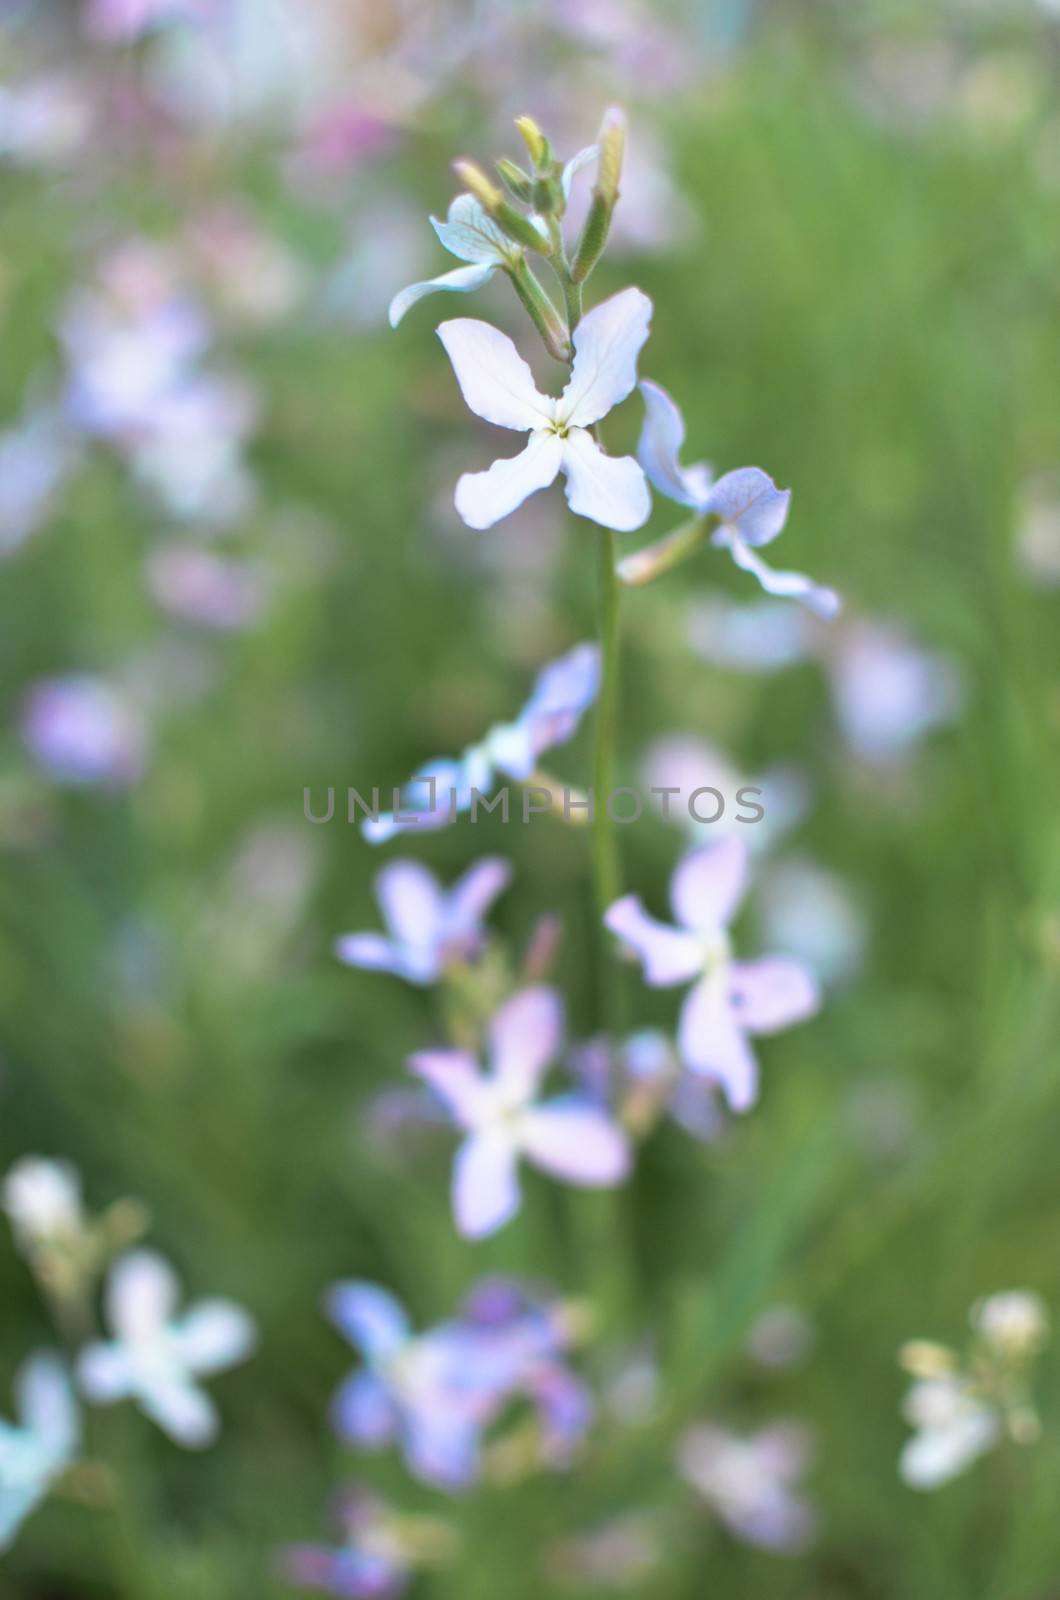 Night flowers violet spring gentle background by kimbo-bo